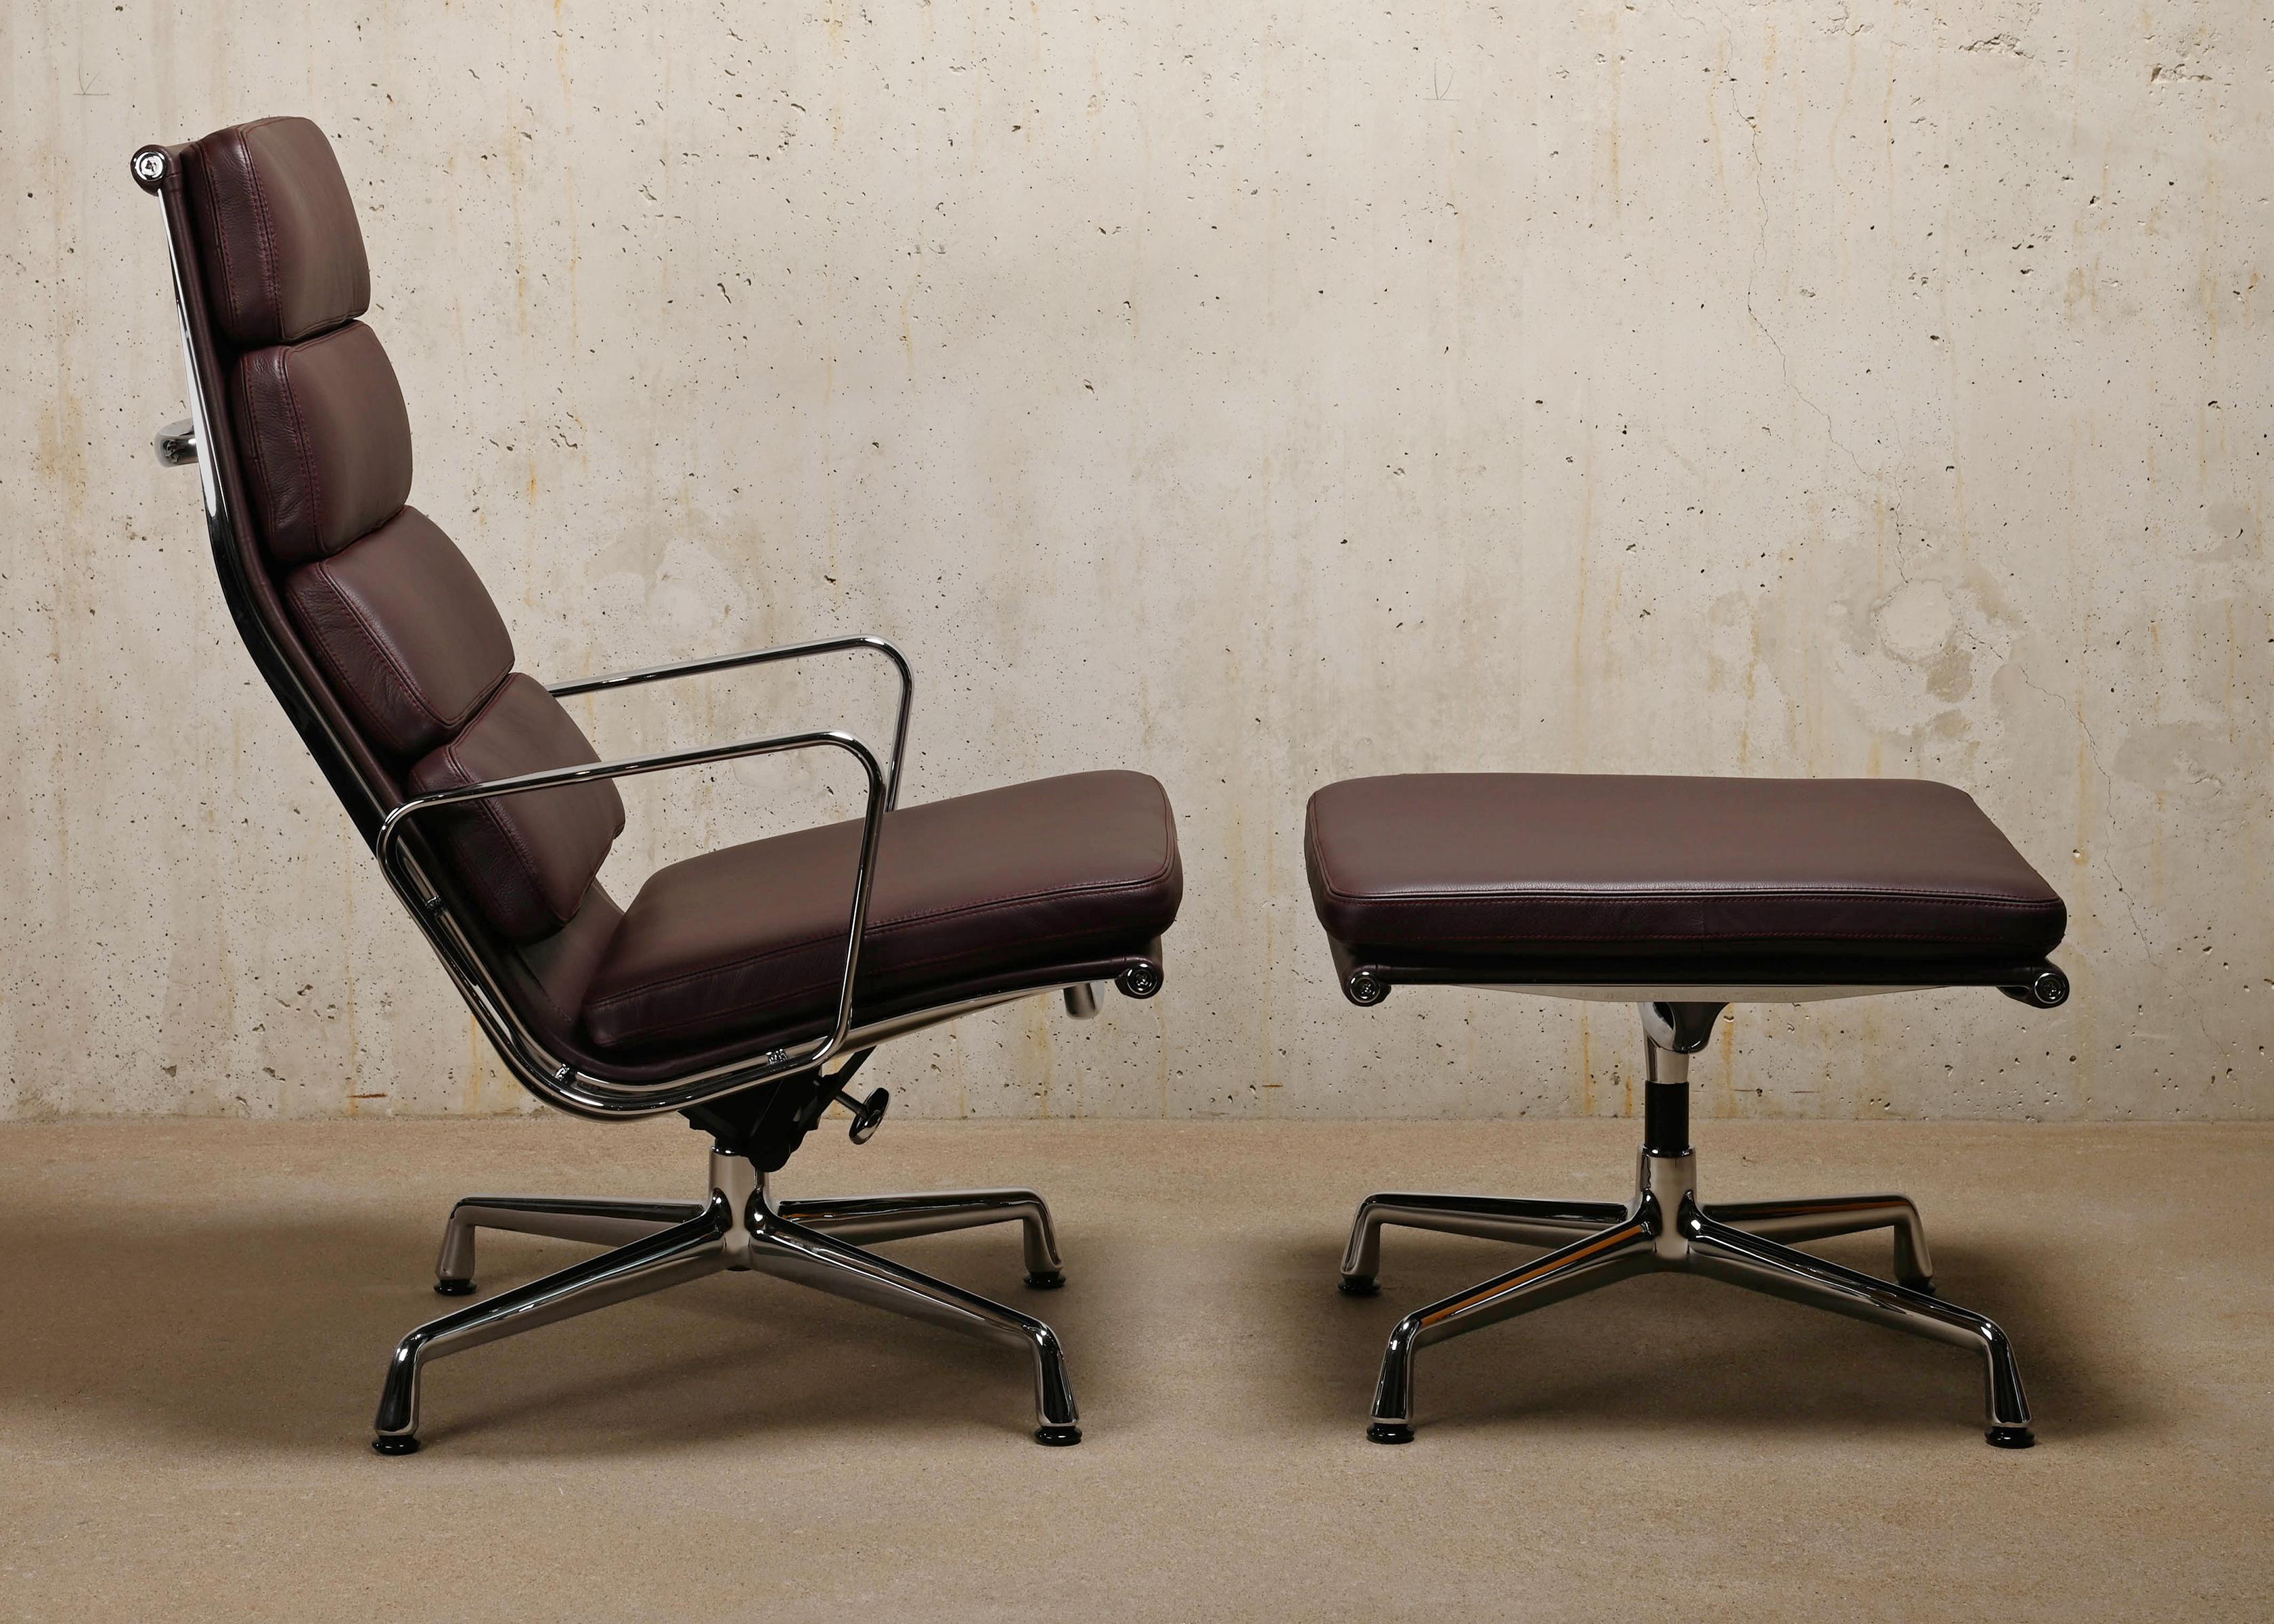 Beautiful lounge chair EA222 and matching ottoman EA223 belong to the famous Aluminum Series designed by Charles & Ray Eames for Herman Miller (US) / Vitra (EU). Exceptional comfort is guaranteed with the extra high backrest, soft cushions and